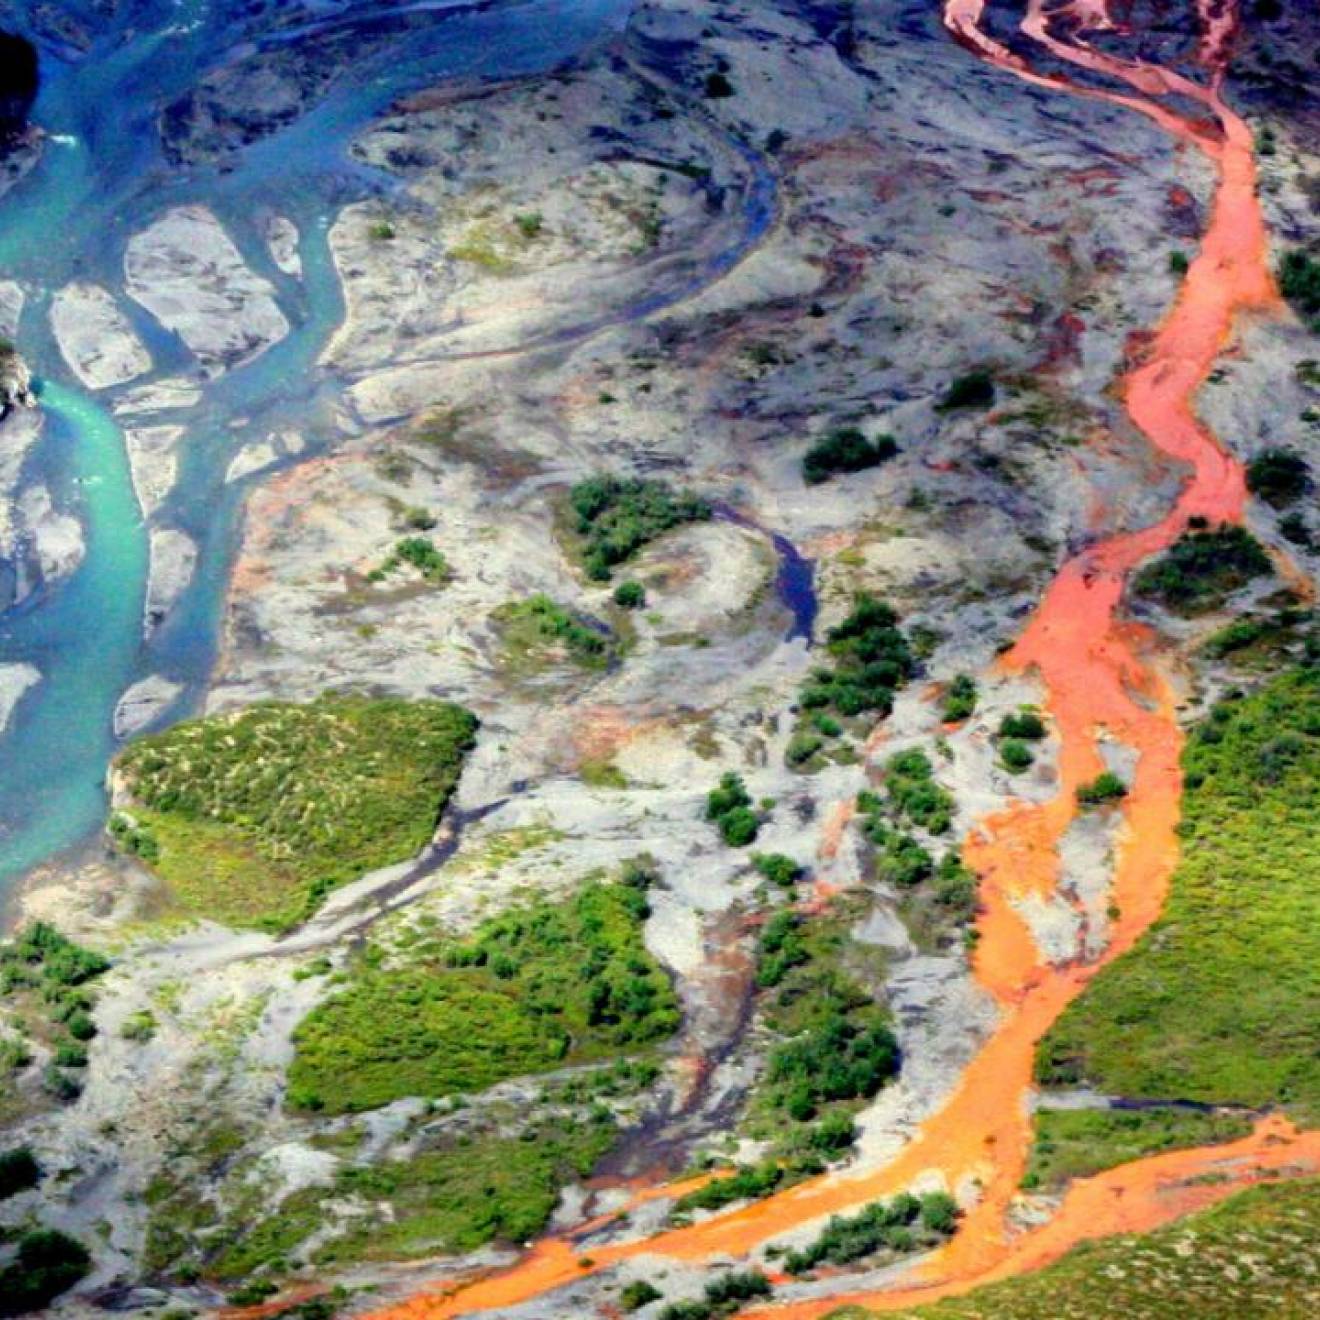 Aerial view of a braided river flowing through a tundra. The channels on the right side of the image are bright orange.